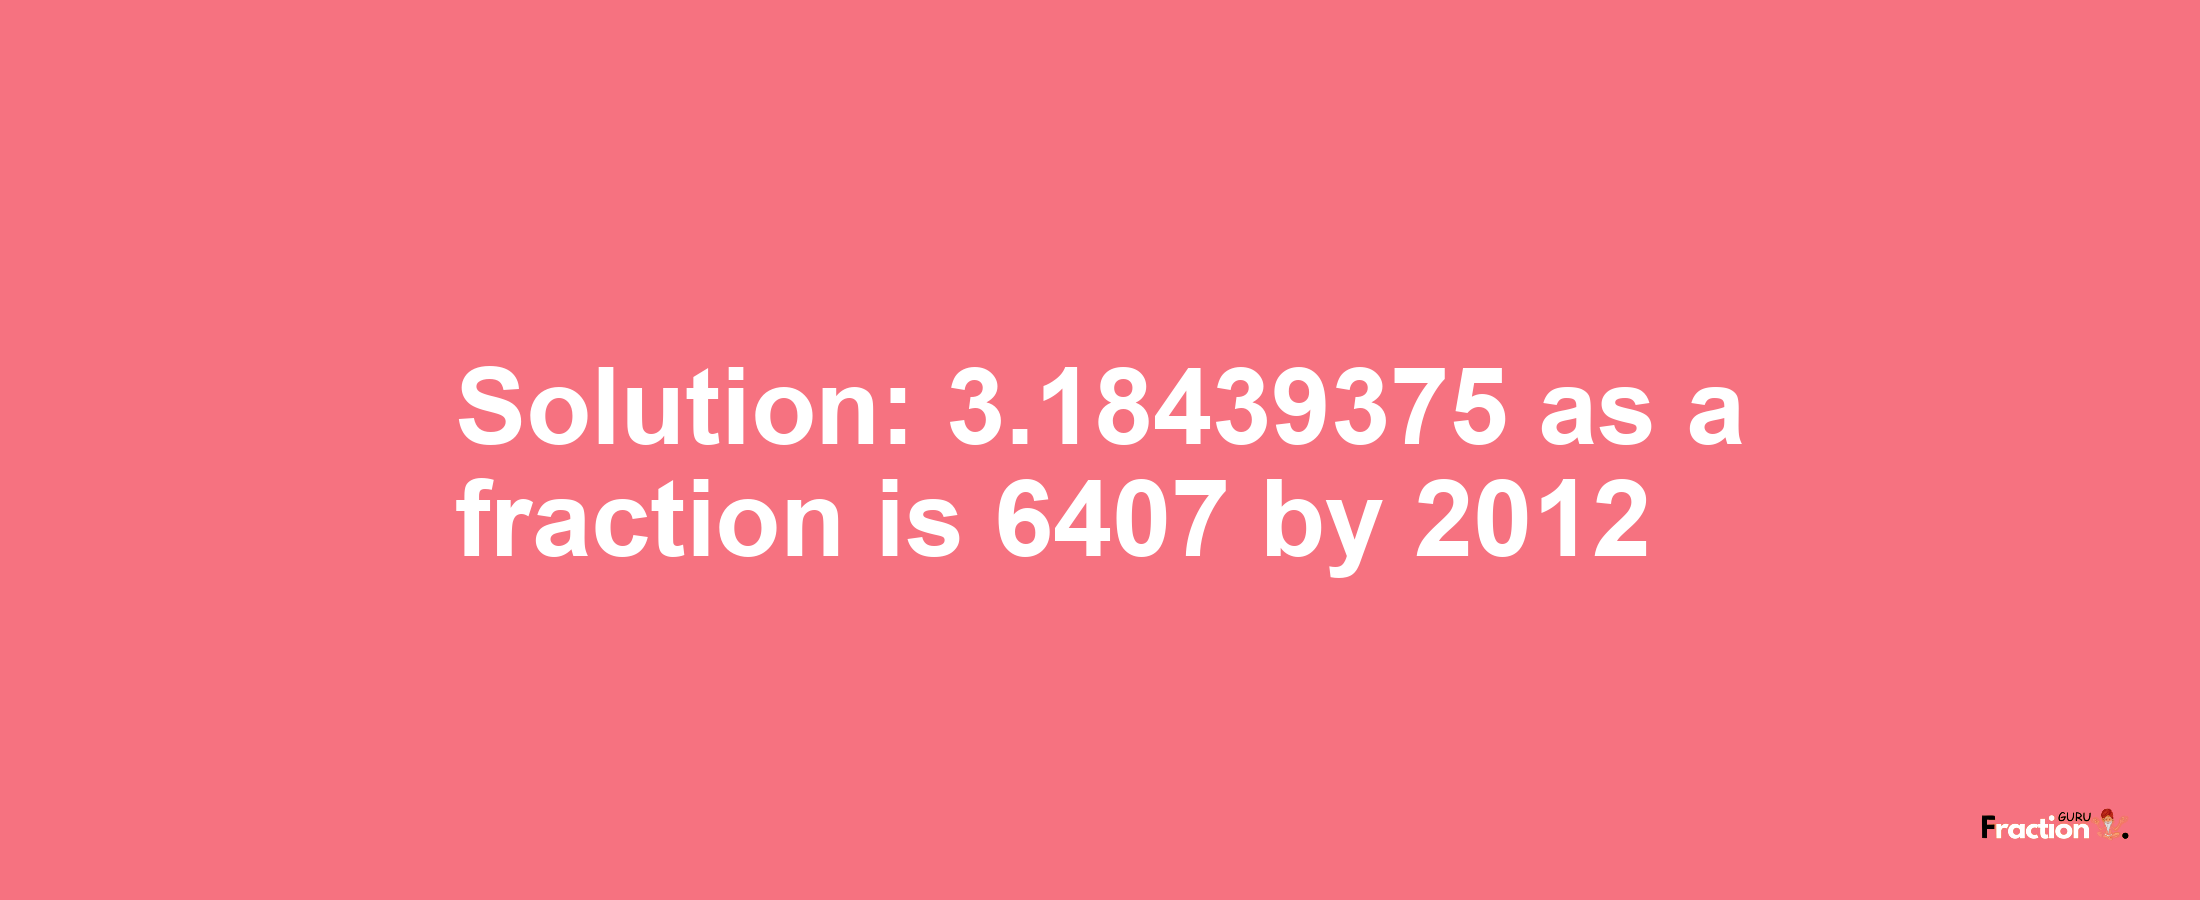 Solution:3.18439375 as a fraction is 6407/2012